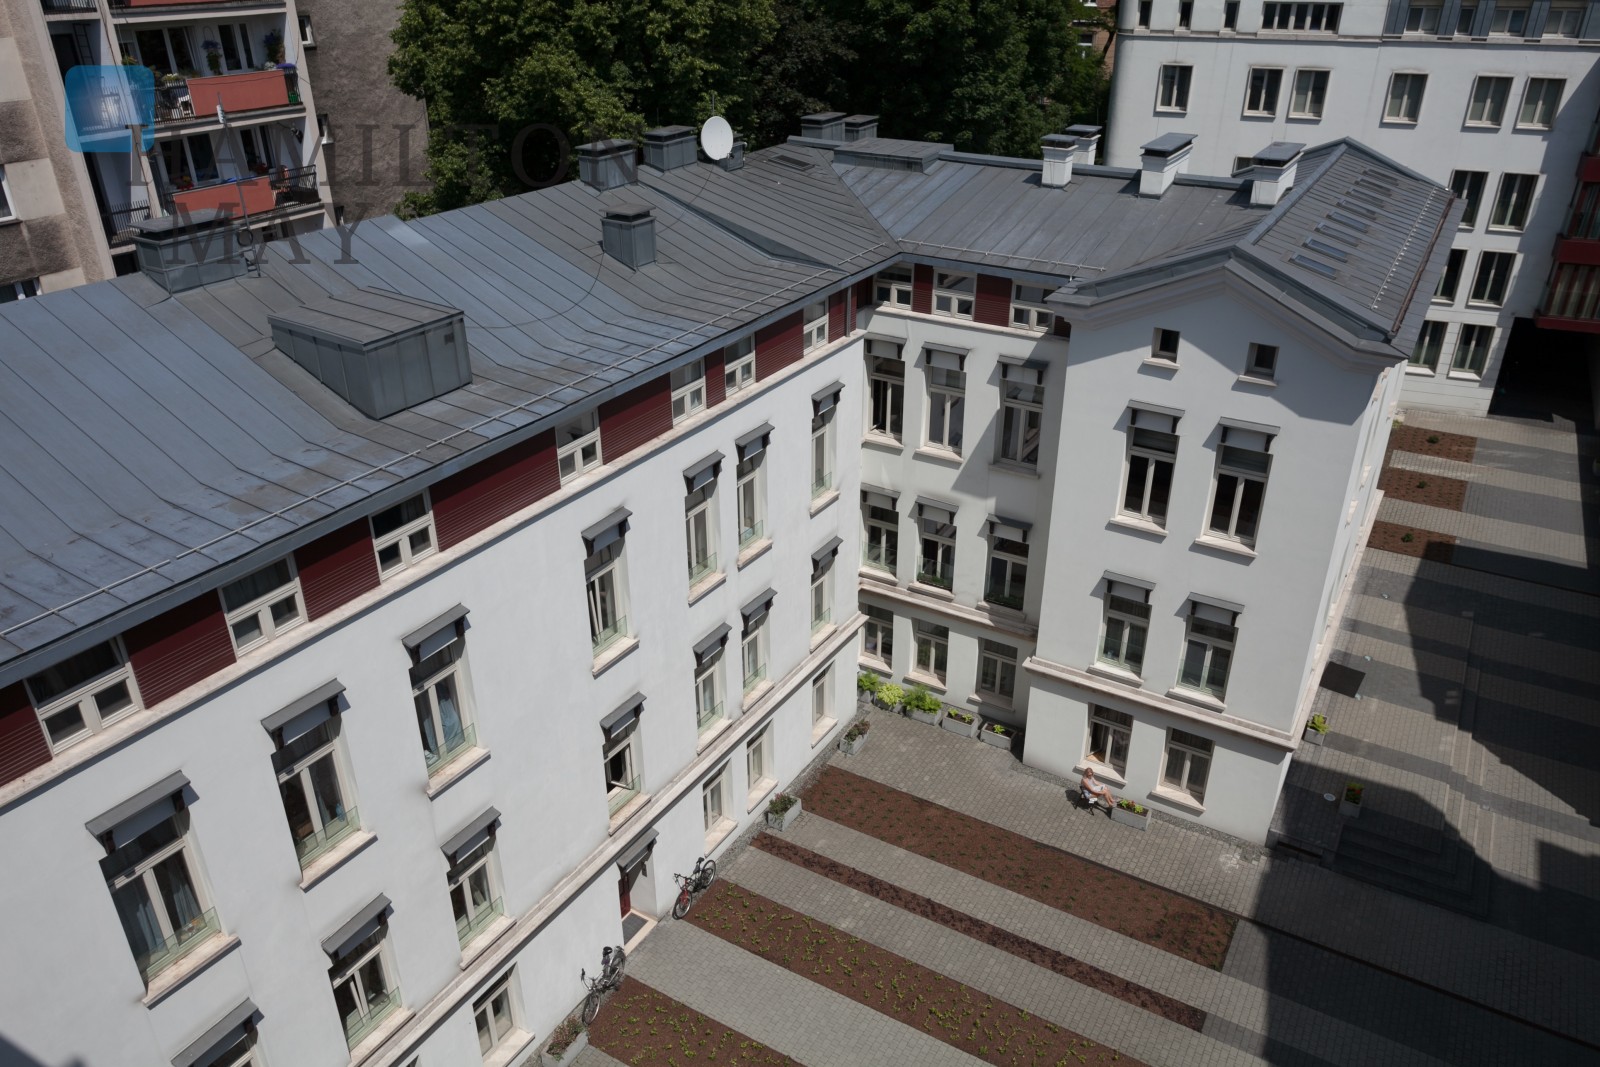 Sobieski Residence – A sought after residential apartment building in a tranquil old town setting - slider